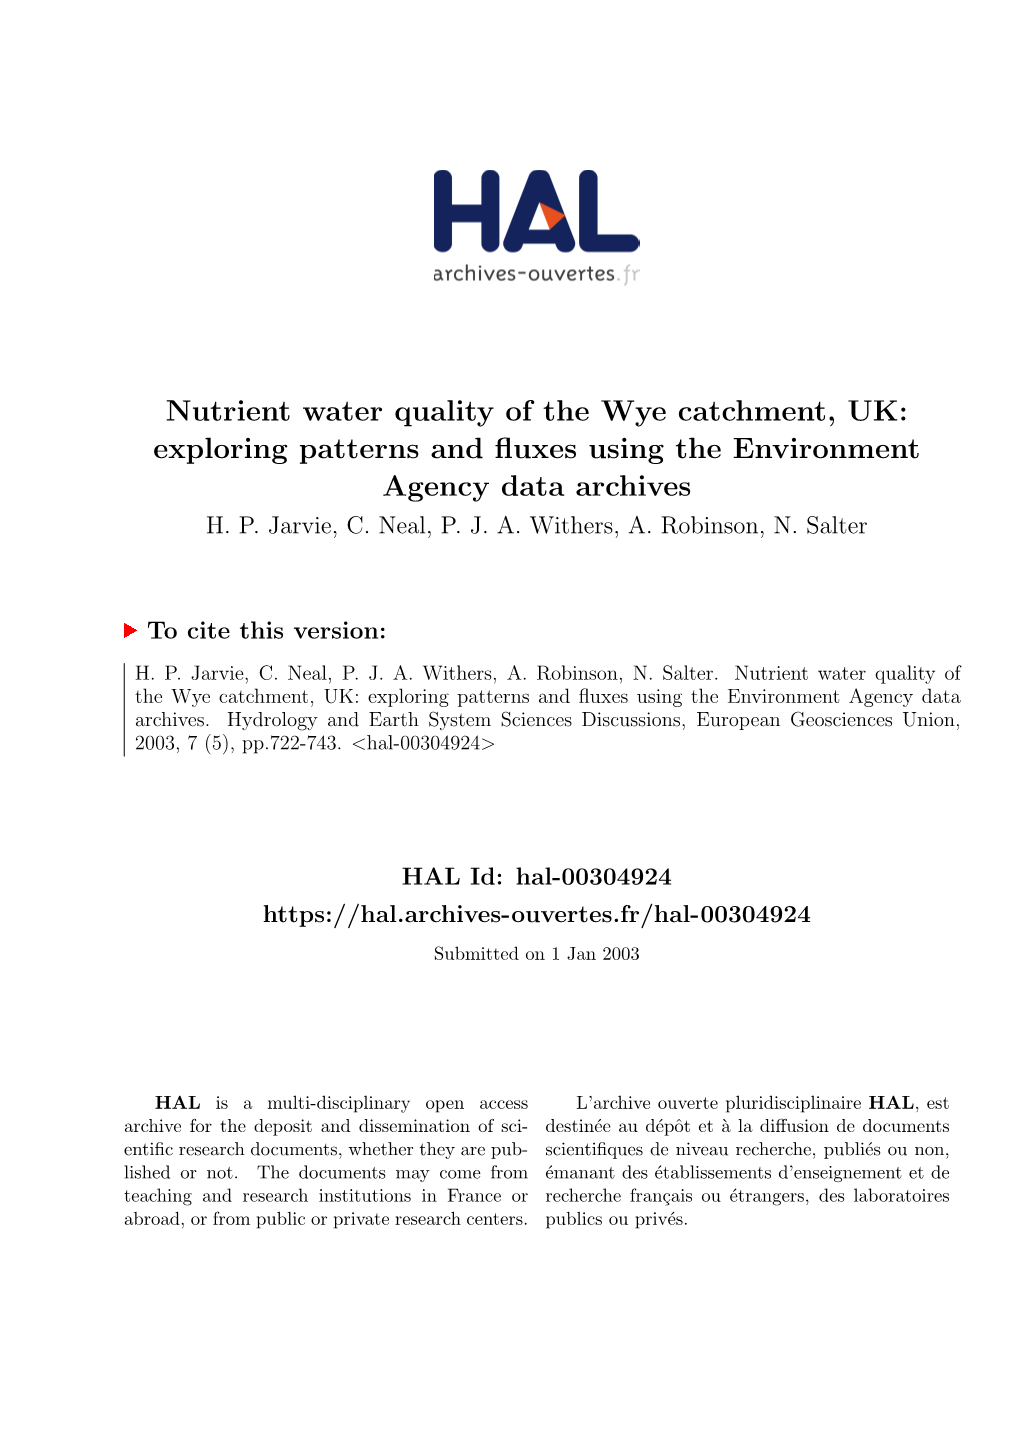 Nutrient Water Quality of the Wye Catchment, UK: Exploring Patterns and ﬂuxes Using the Environment Agency Data Archives H